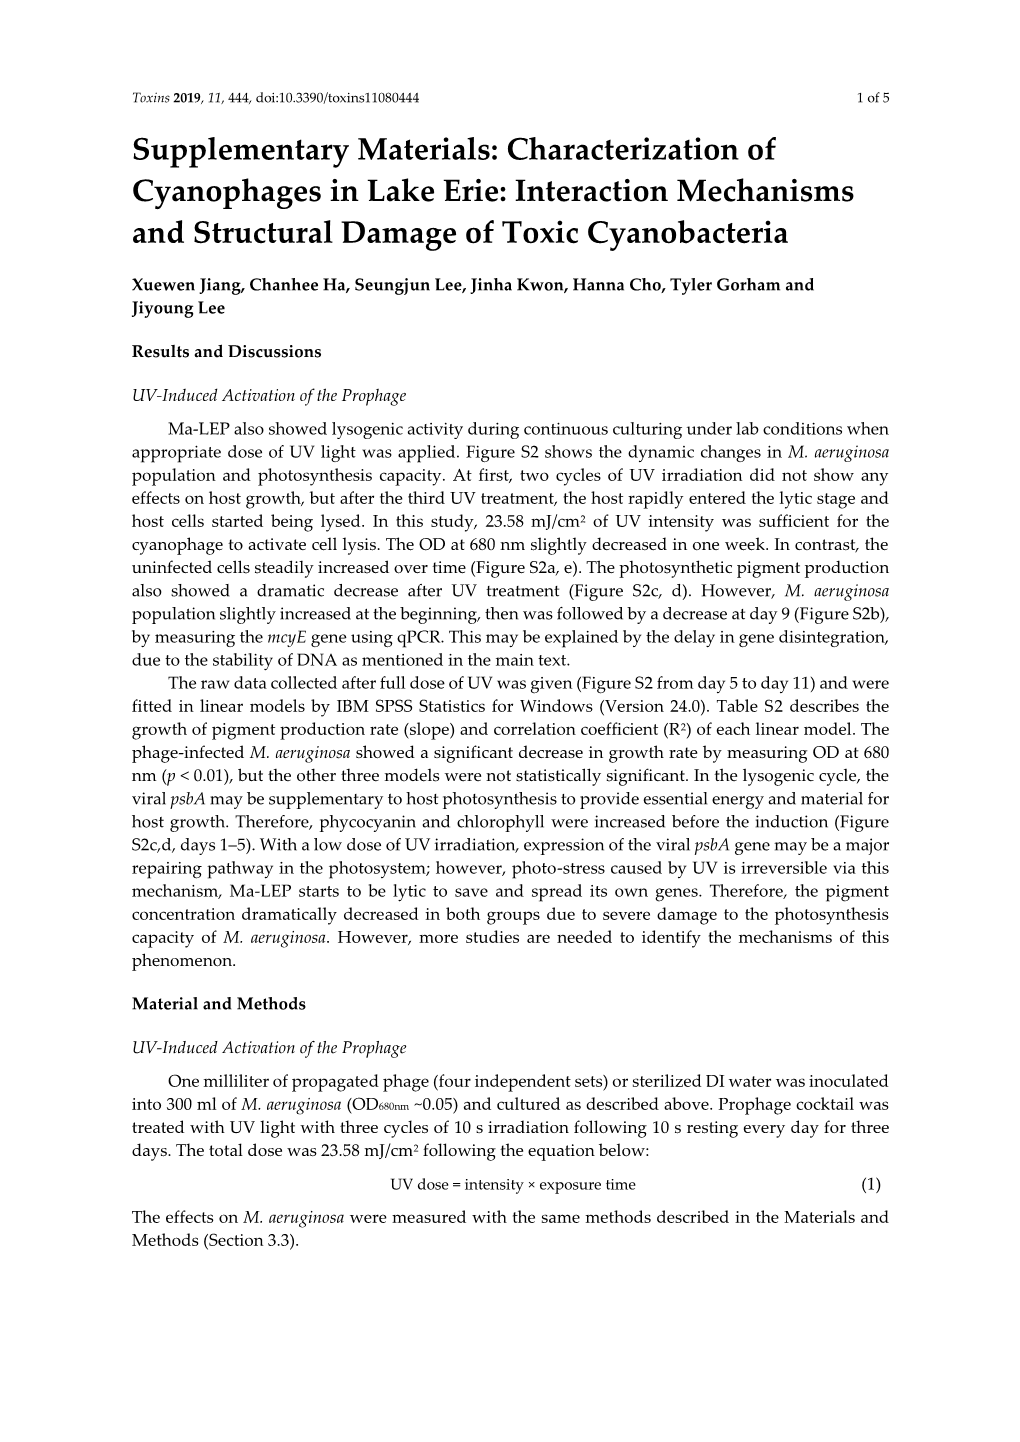 Characterization of Cyanophages in Lake Erie: Interaction Mechanisms and Structural Damage of Toxic Cyanobacteria